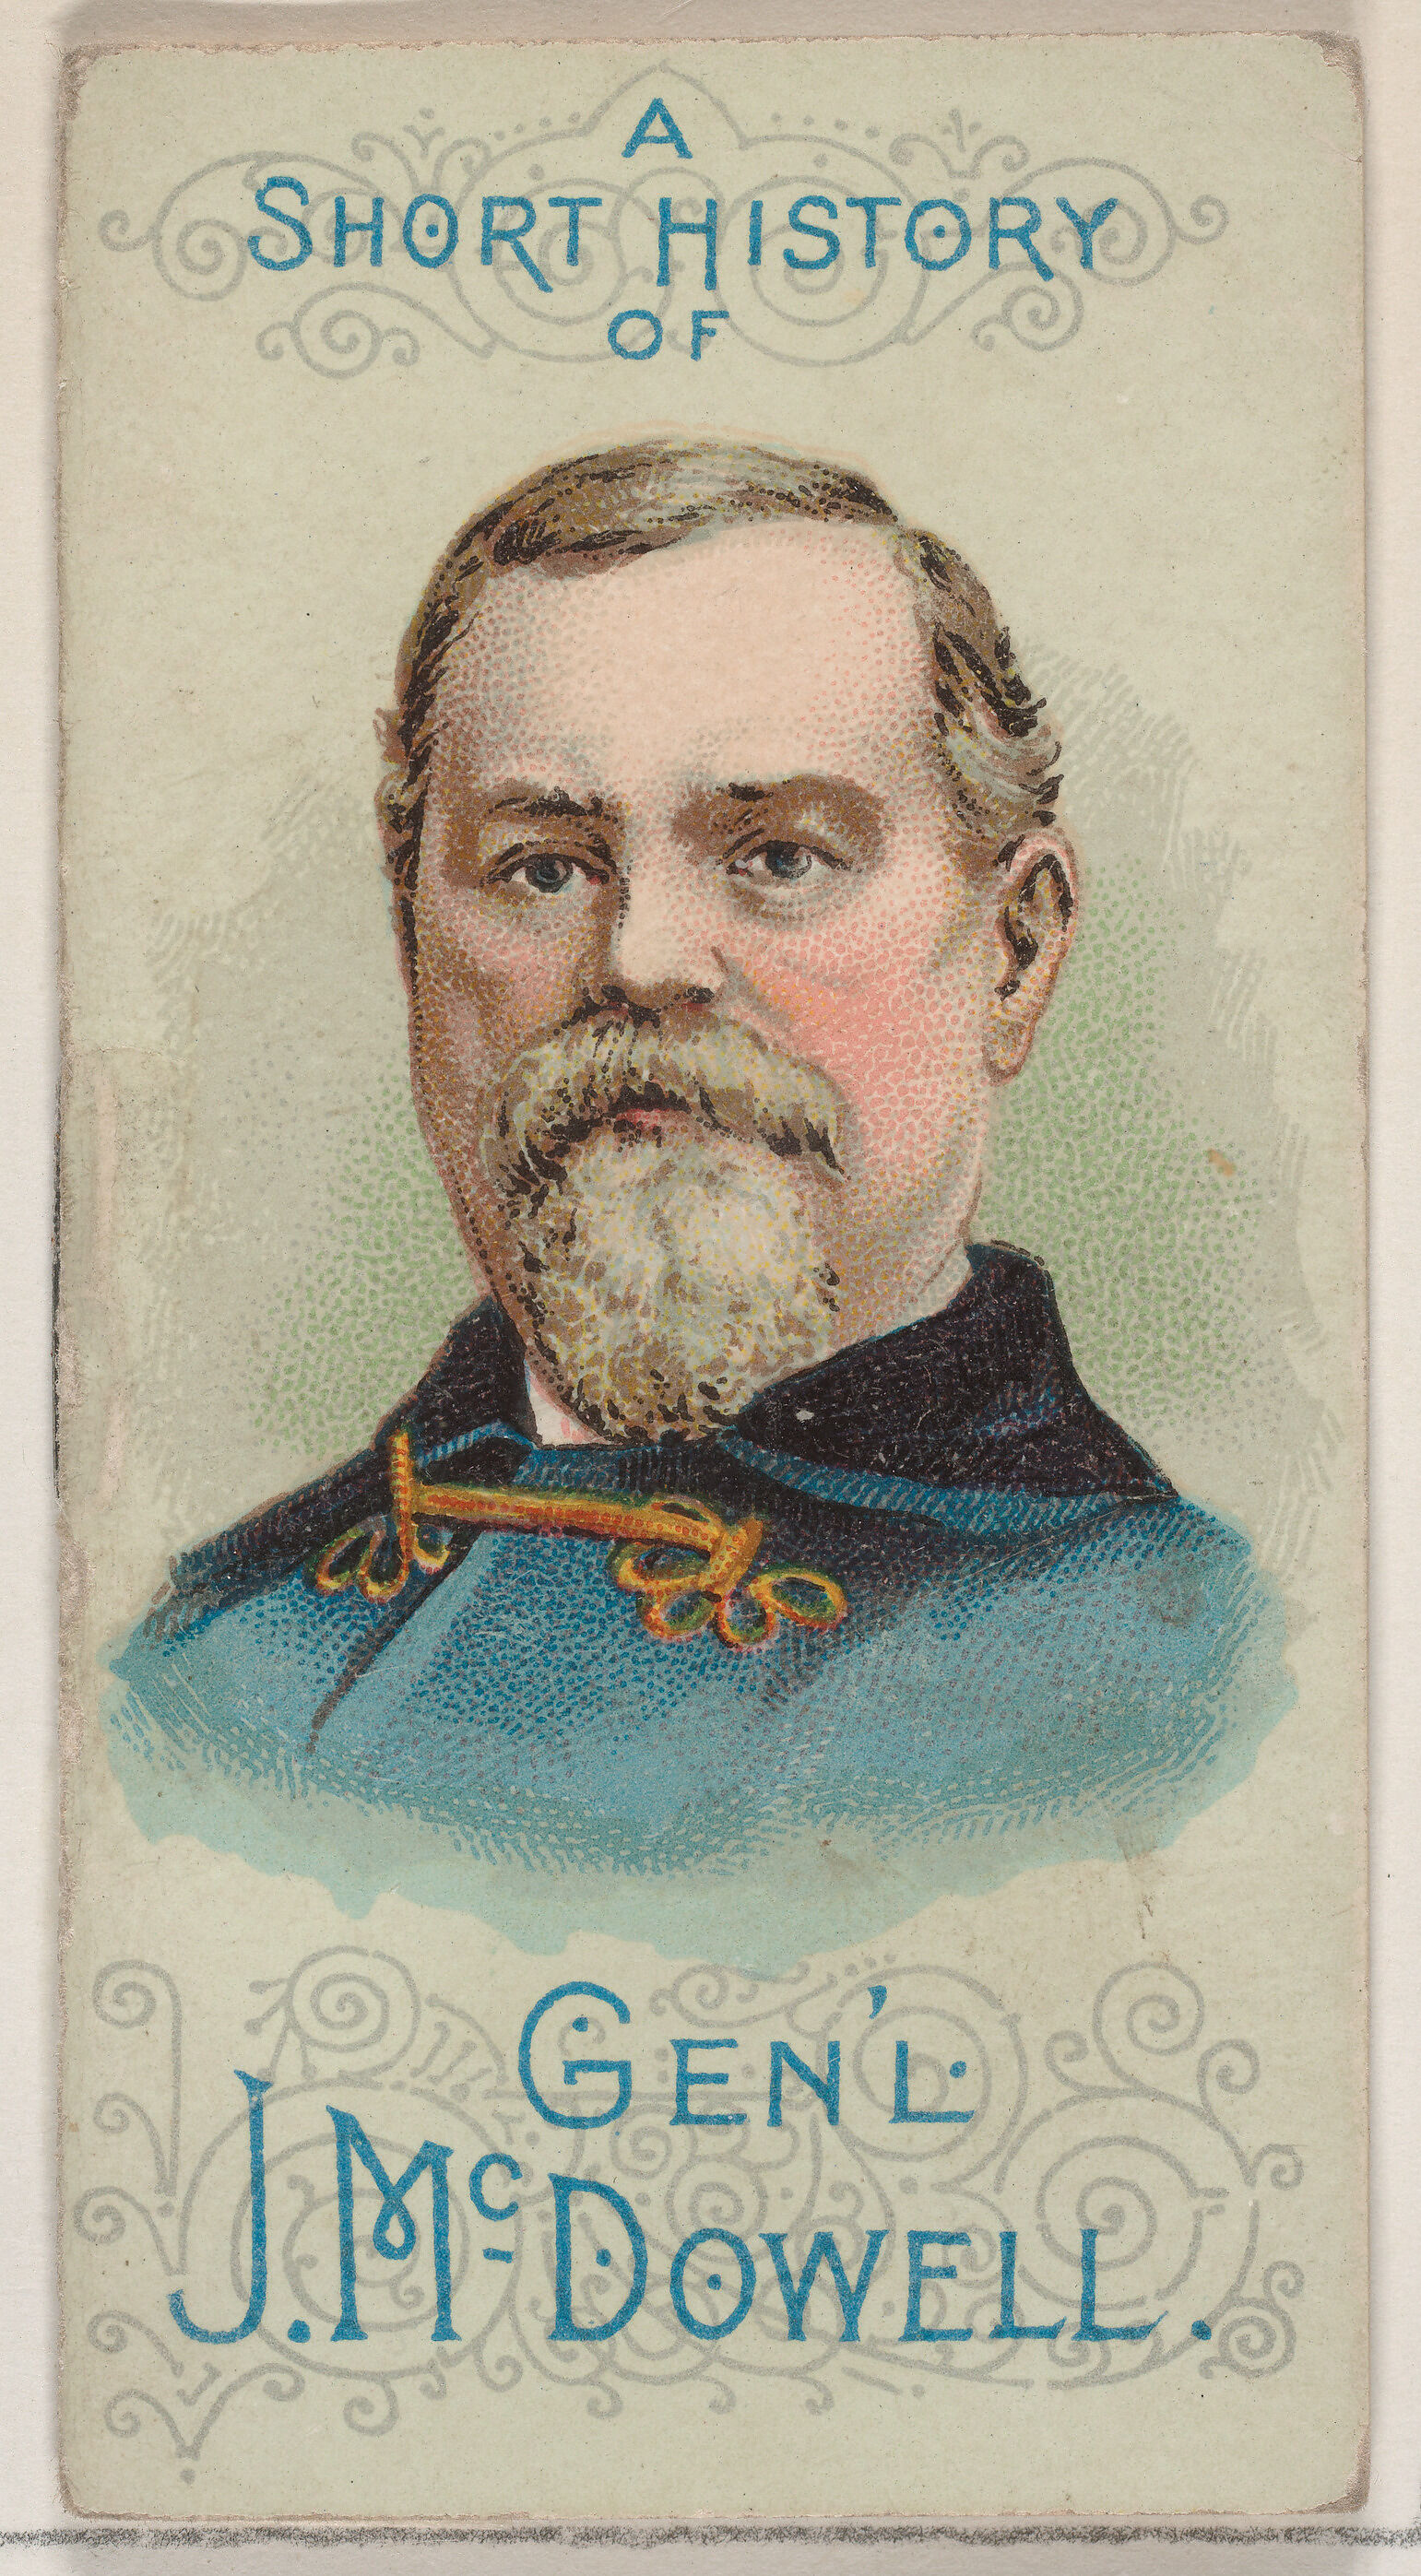 A Short History of General Irvin McDowell, from the Histories of Generals series of booklets (N78) for Duke brand cigarettes, Issued by W. Duke, Sons &amp; Co. (New York and Durham, N.C.), Commercial color lithograph 